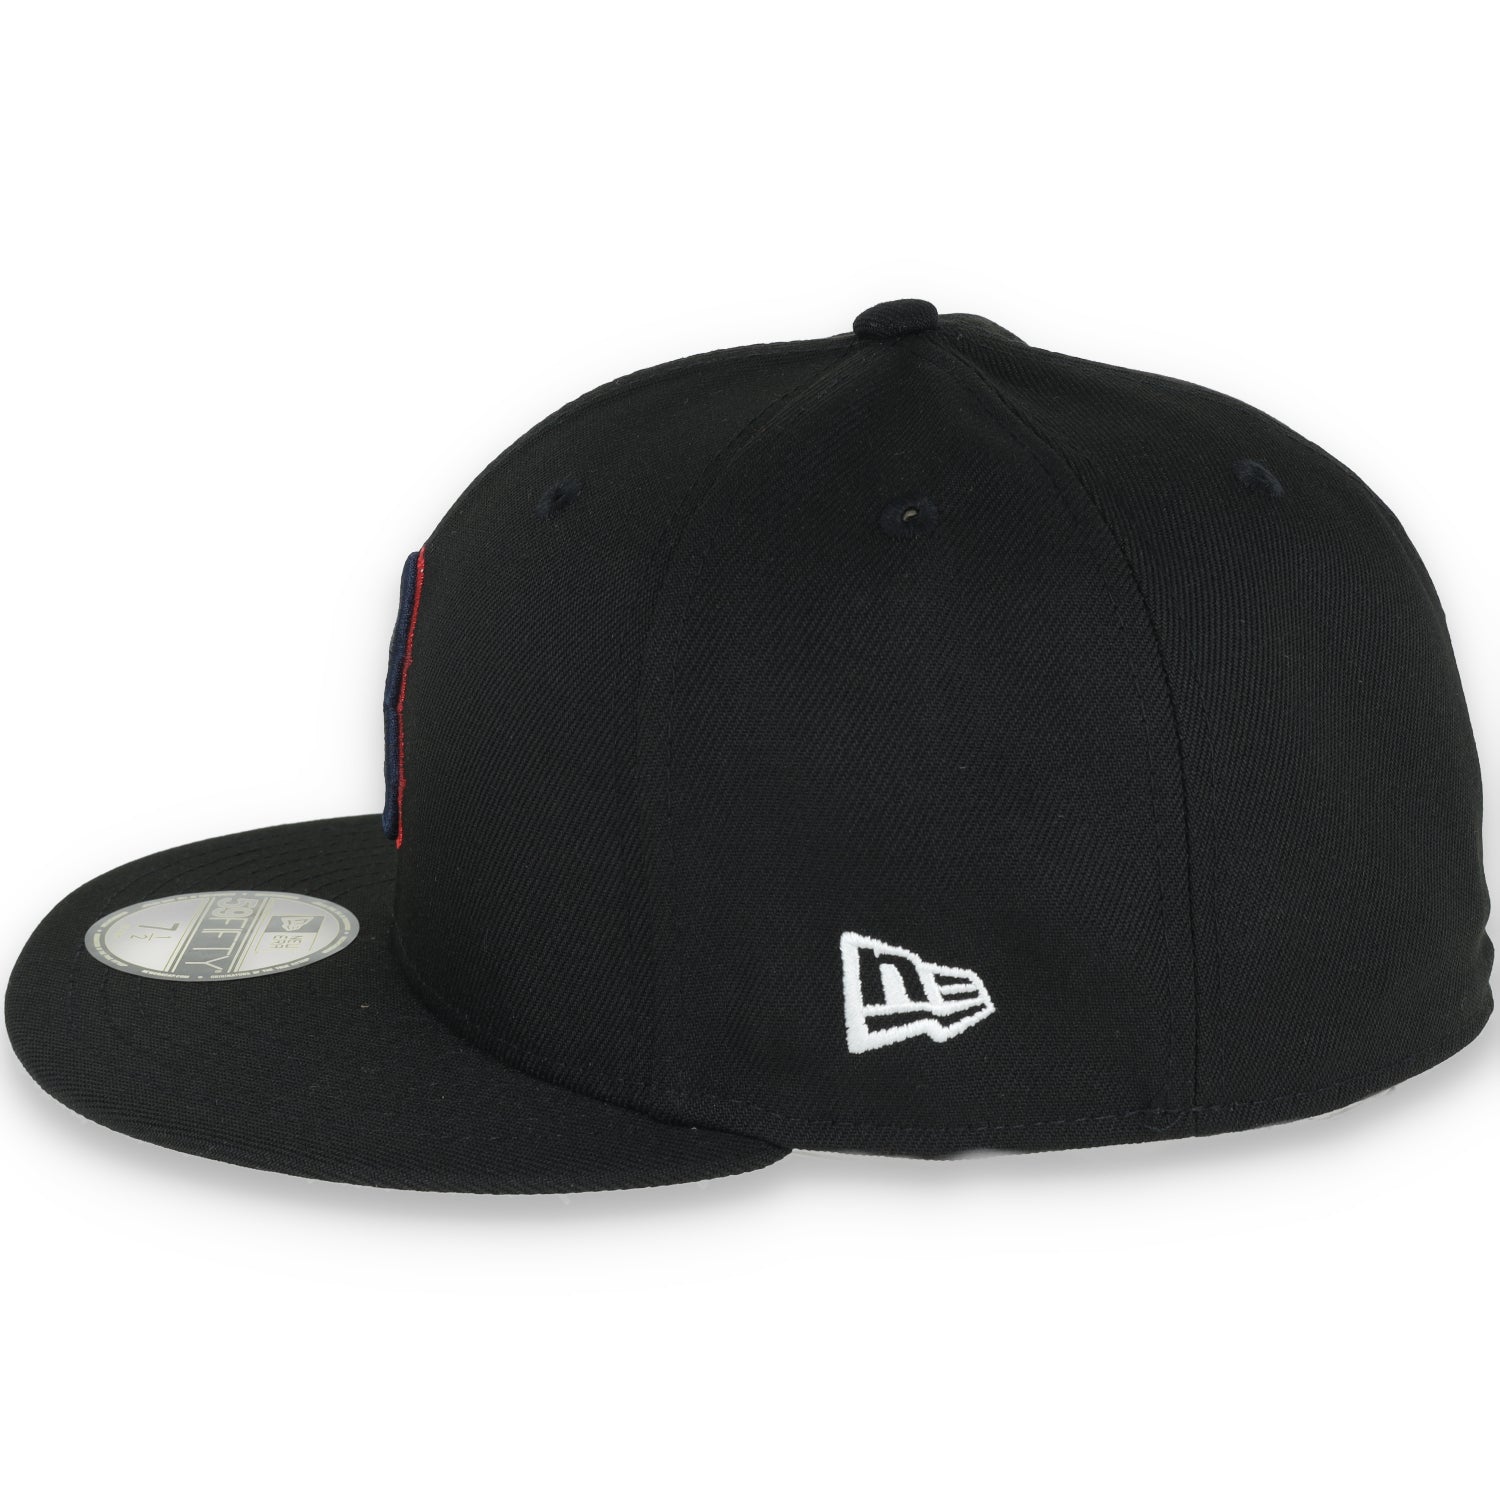 New Era Boston Red Sox 100th Anniversary Metallic Logo Side Patch 59fifty Fitted Hat-Black